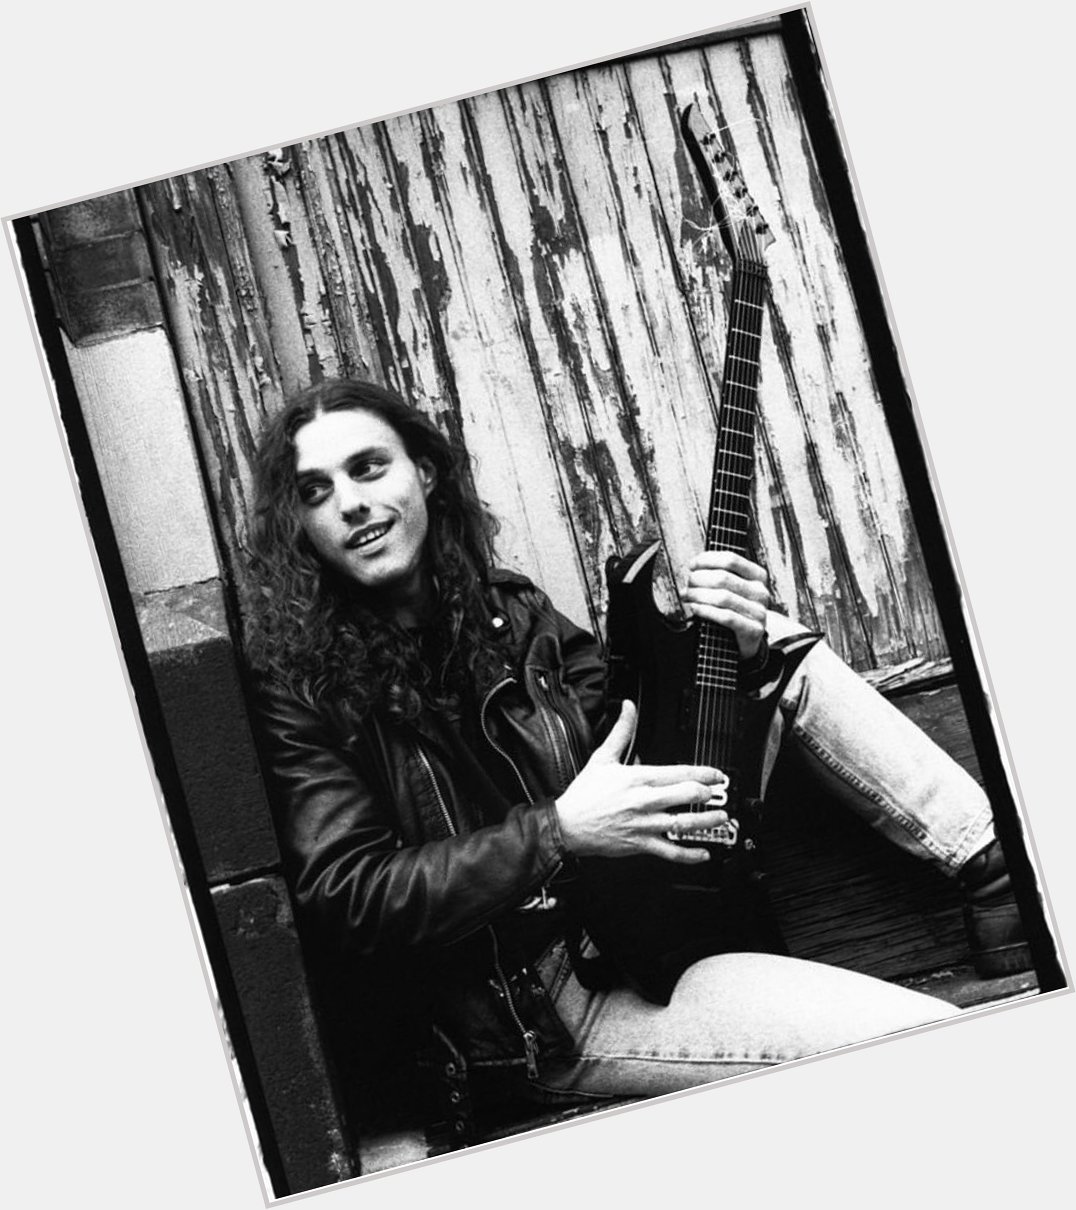 Happy Birthday to the creator of death metal Chuck Schuldiner the world lost a legend!  